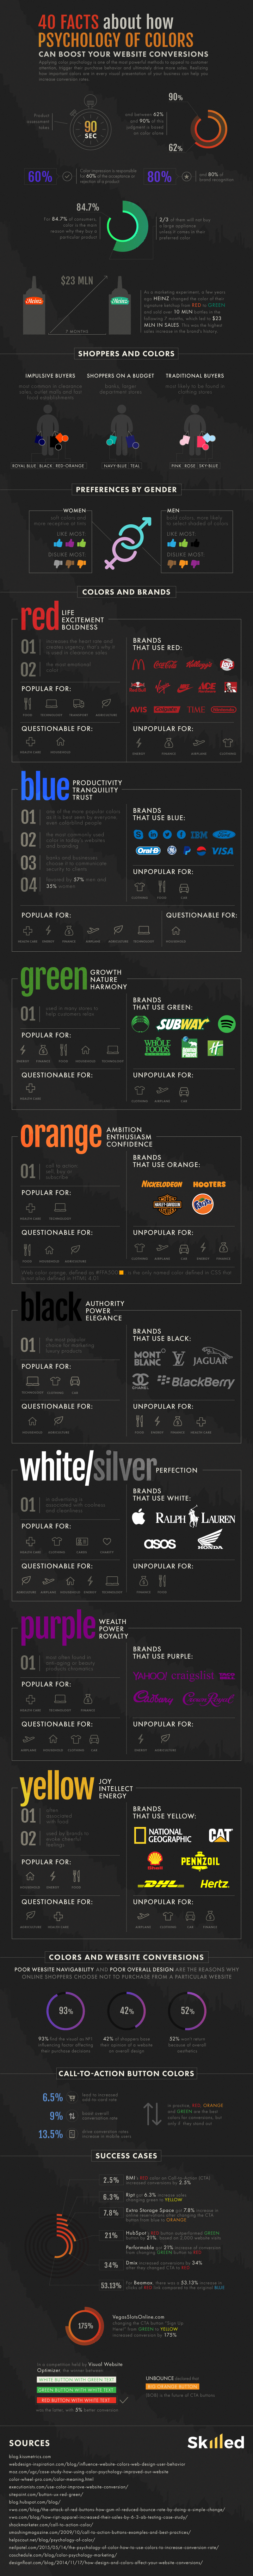 40 Facts About How Psychology of Colors Can Boost Your Website Conversions #infographic